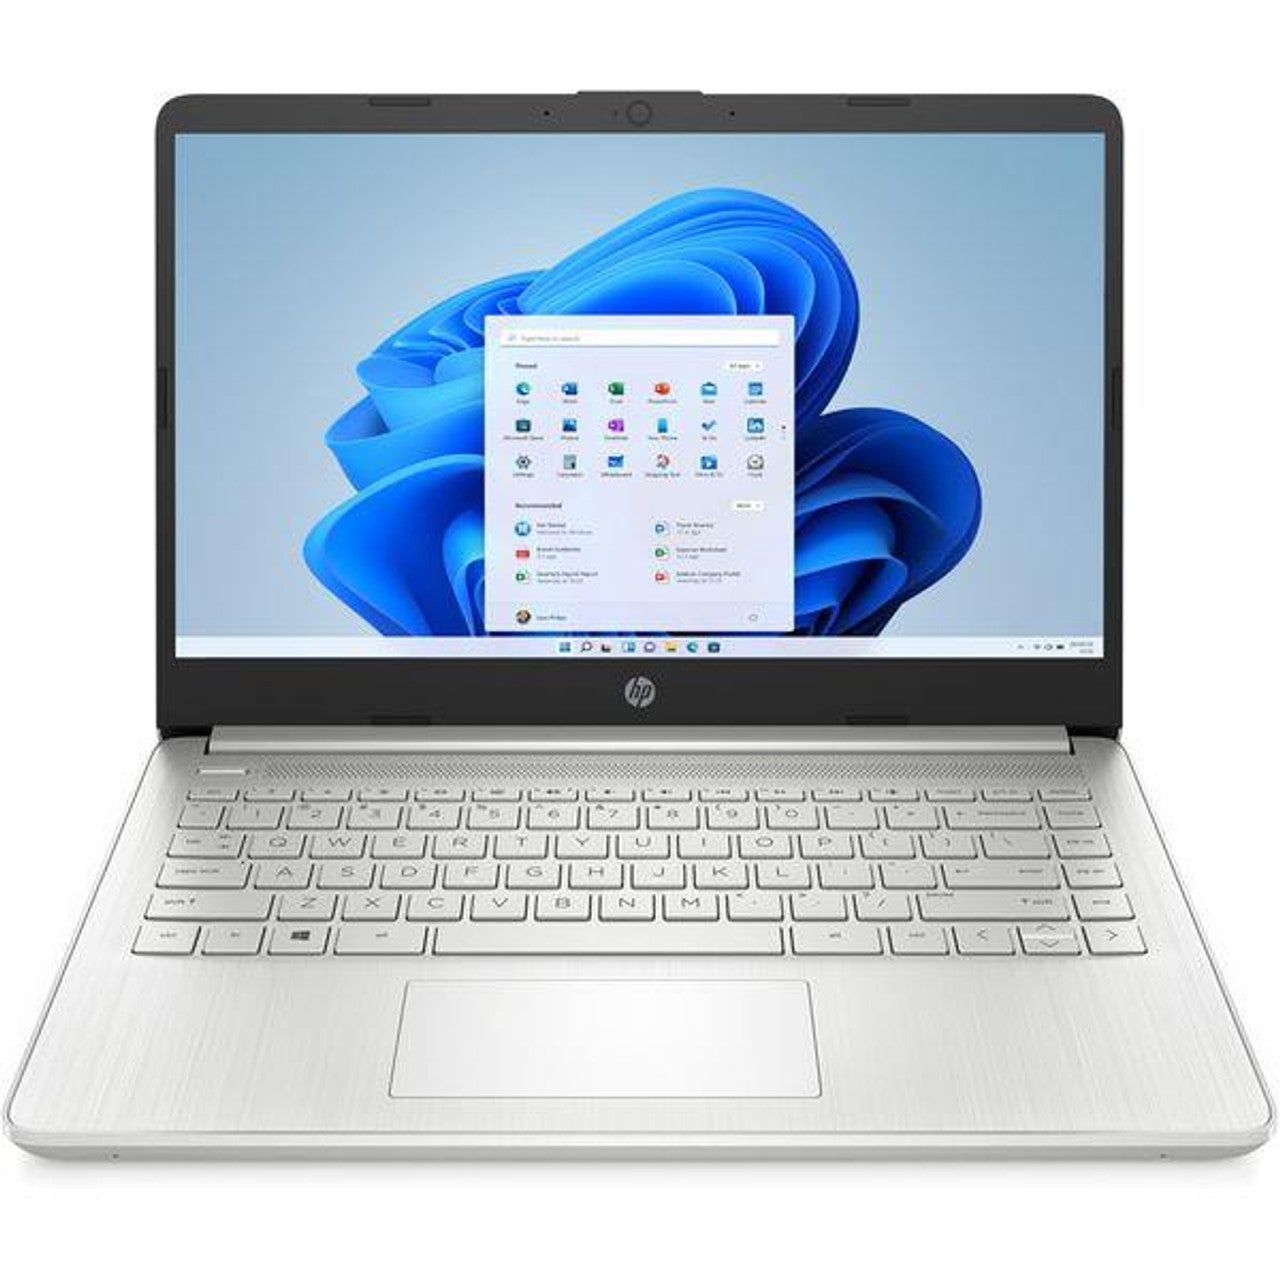 HP 14S-DQ2507SA 14" Laptop Intel Core i3 4GB RAM 128GB SSD - Silver - Refurbished Excellent